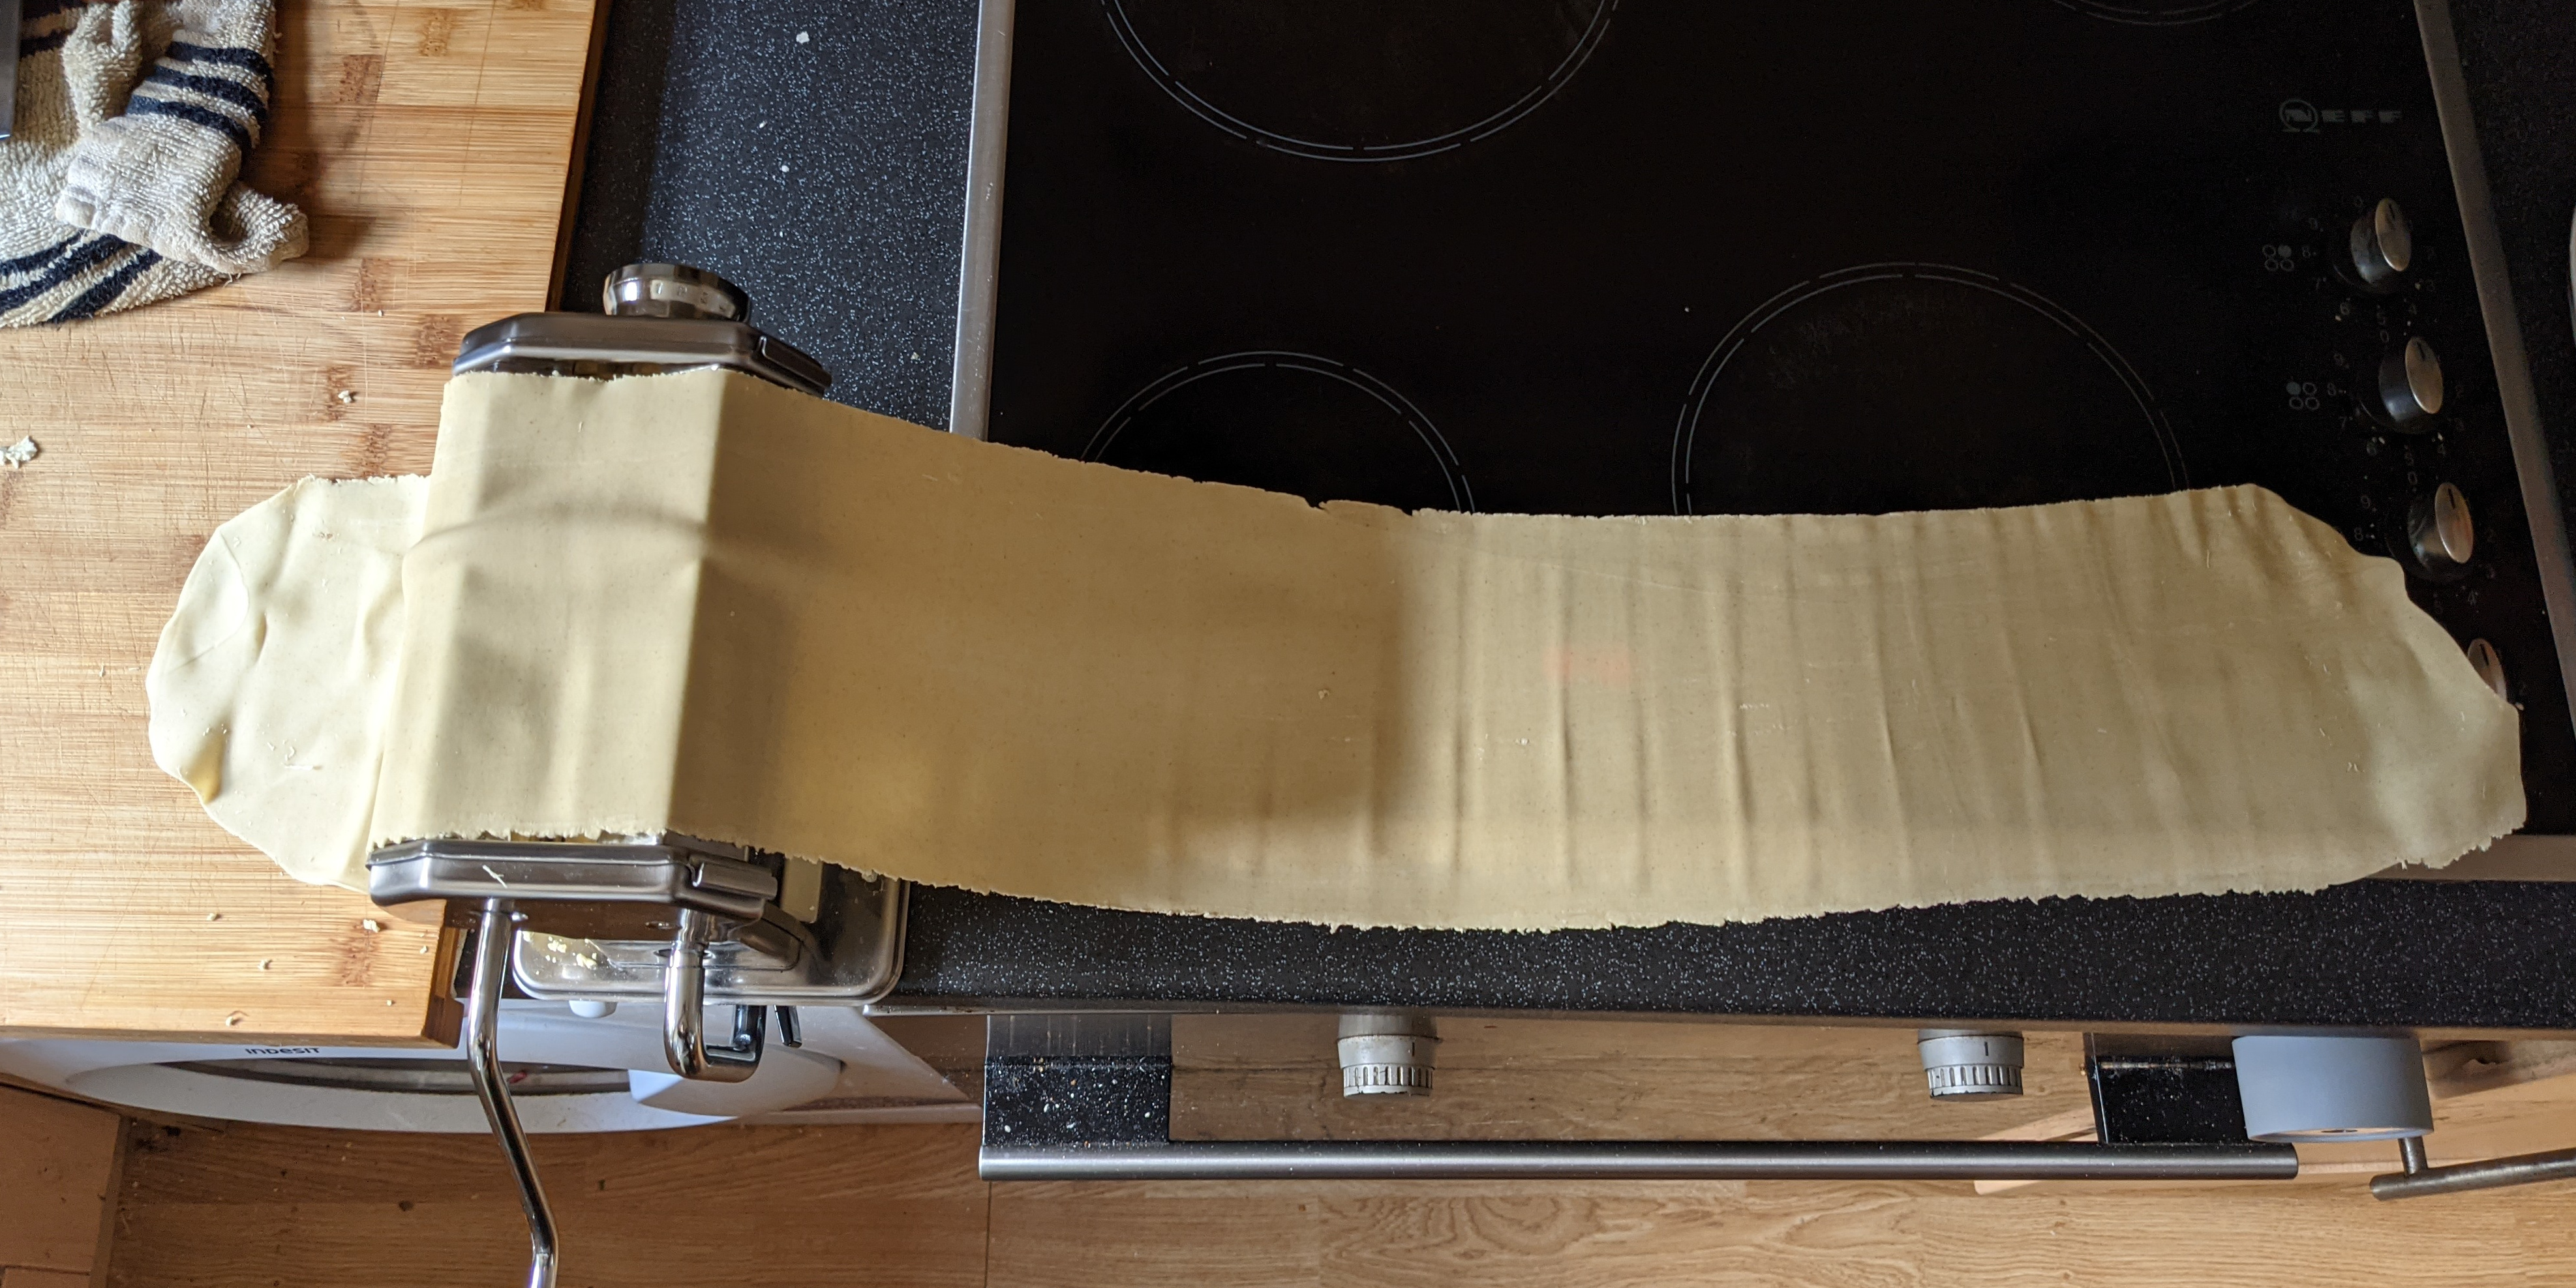 A long thin sheet of dough around a meter in length